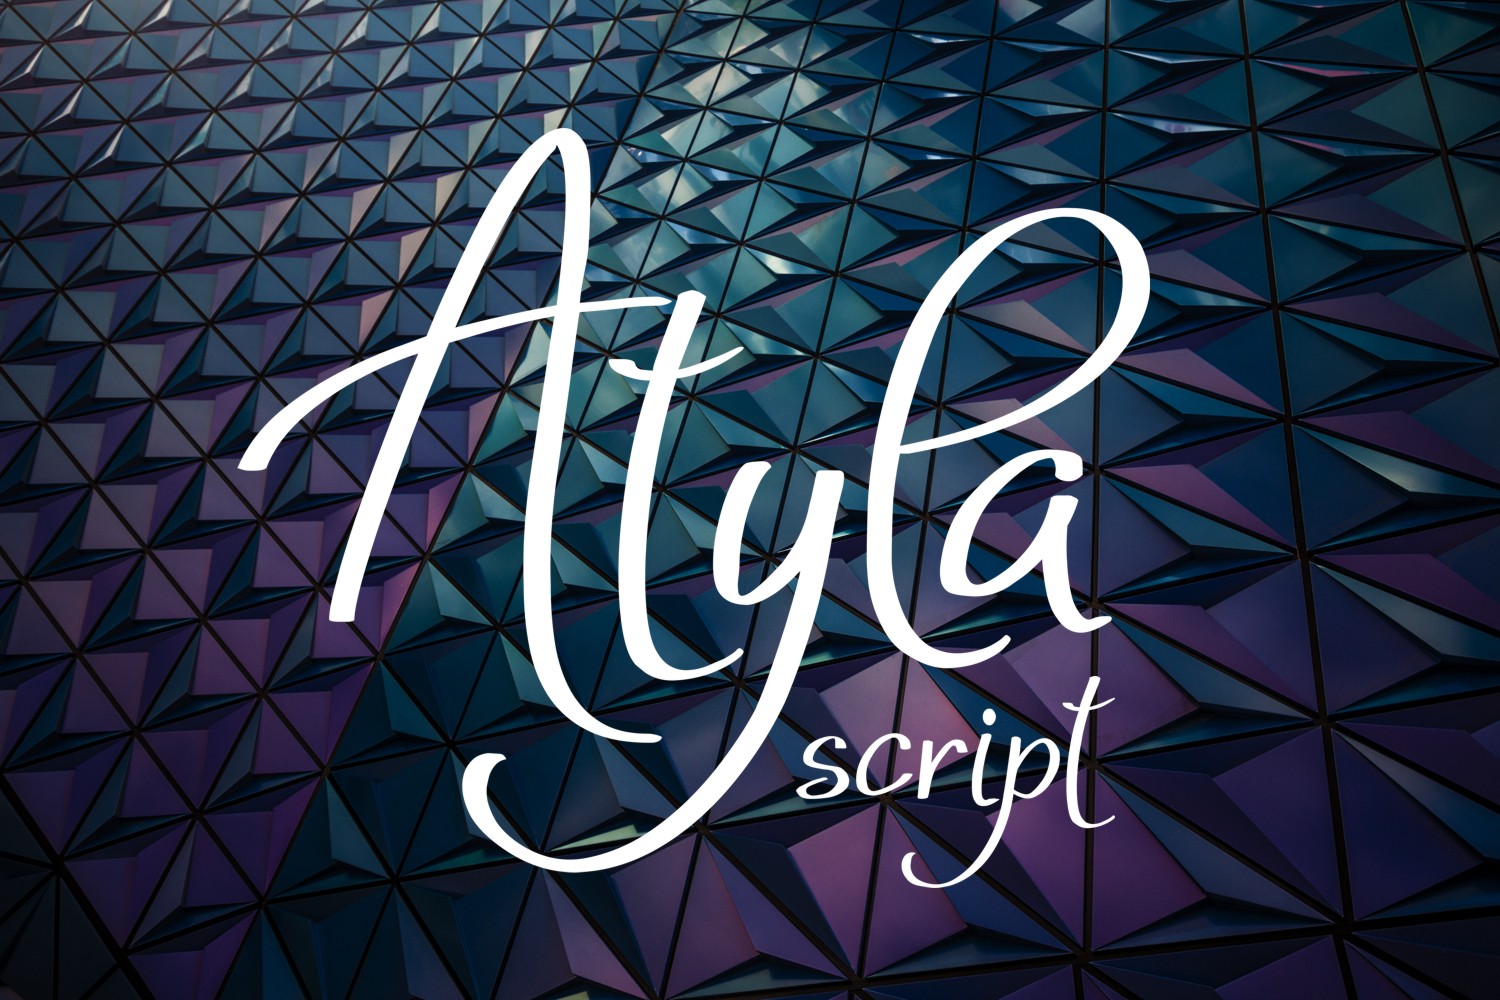 Atyla Font Poster 1